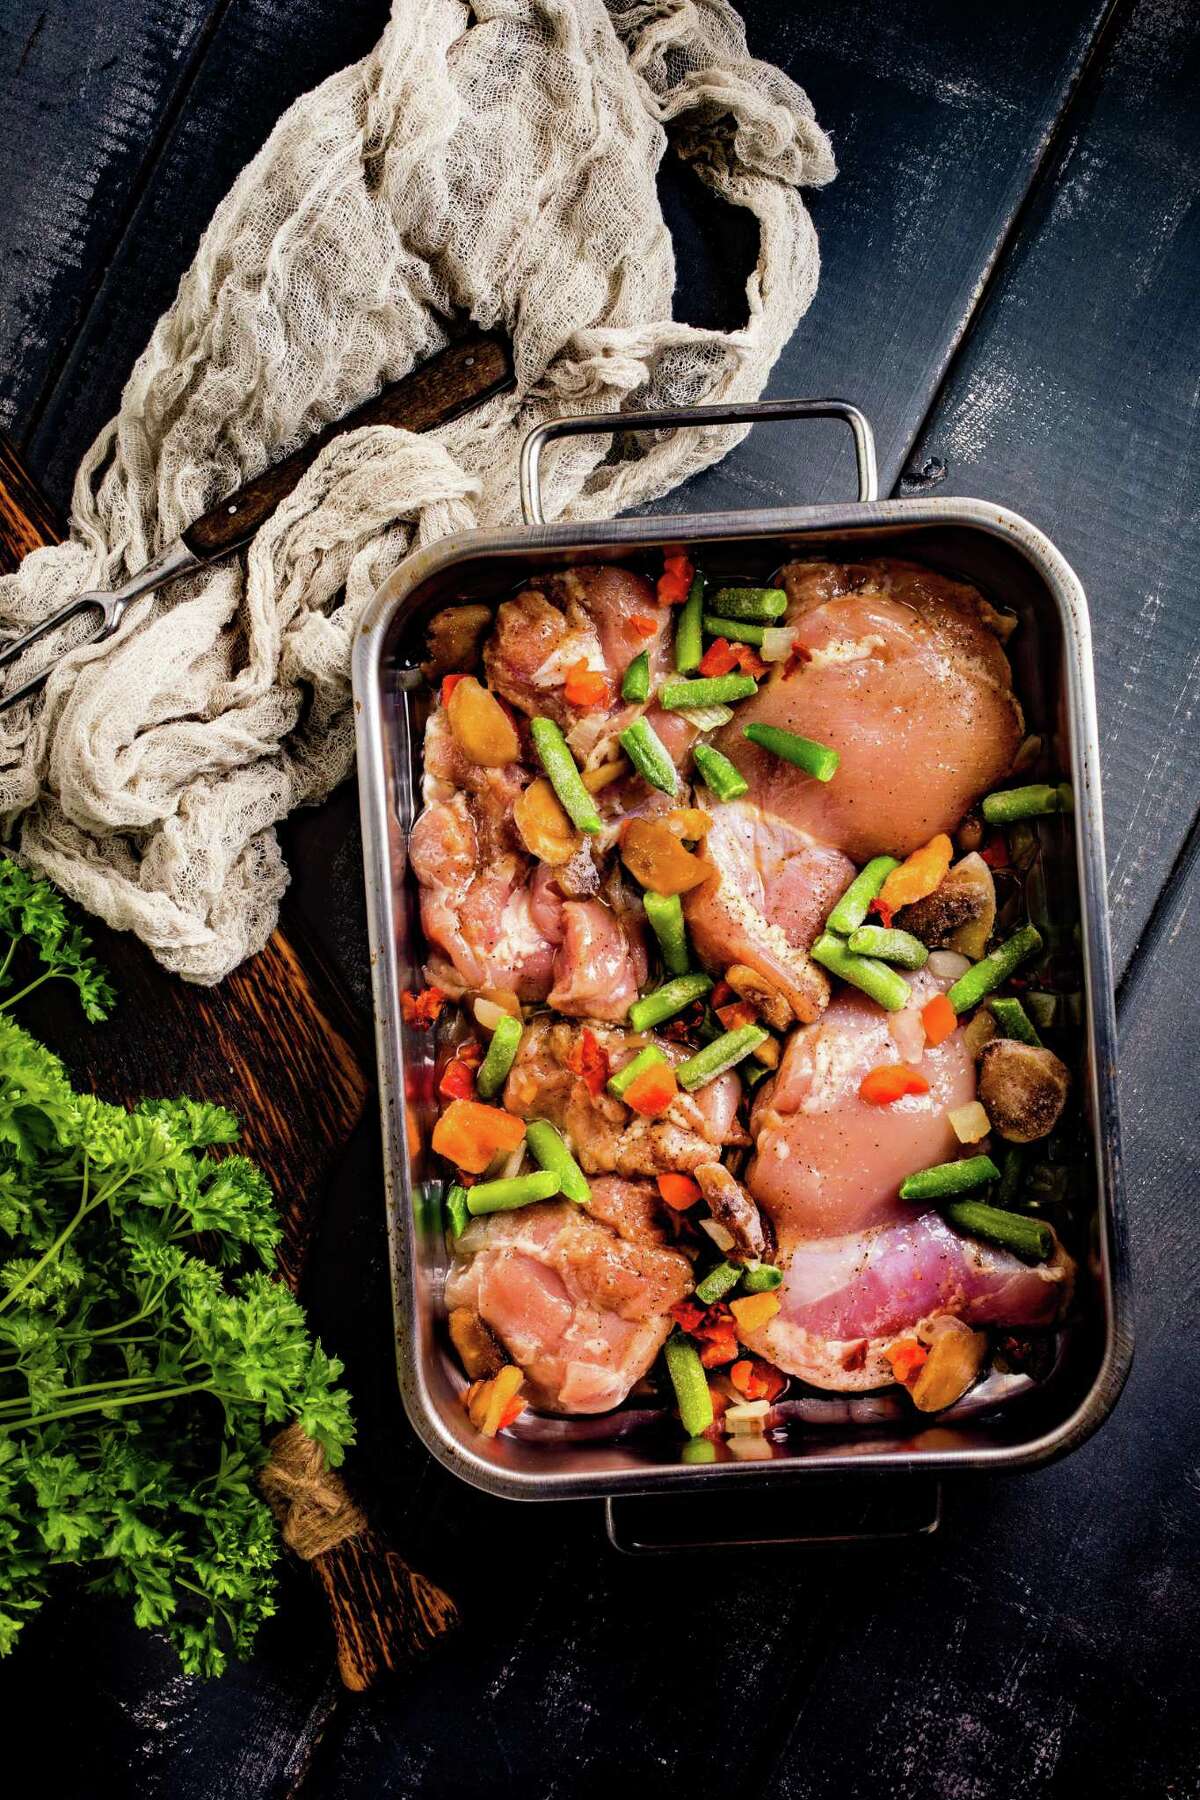 Stainless steel roasting pans are versatile devices perfect for a number of culinary applications.